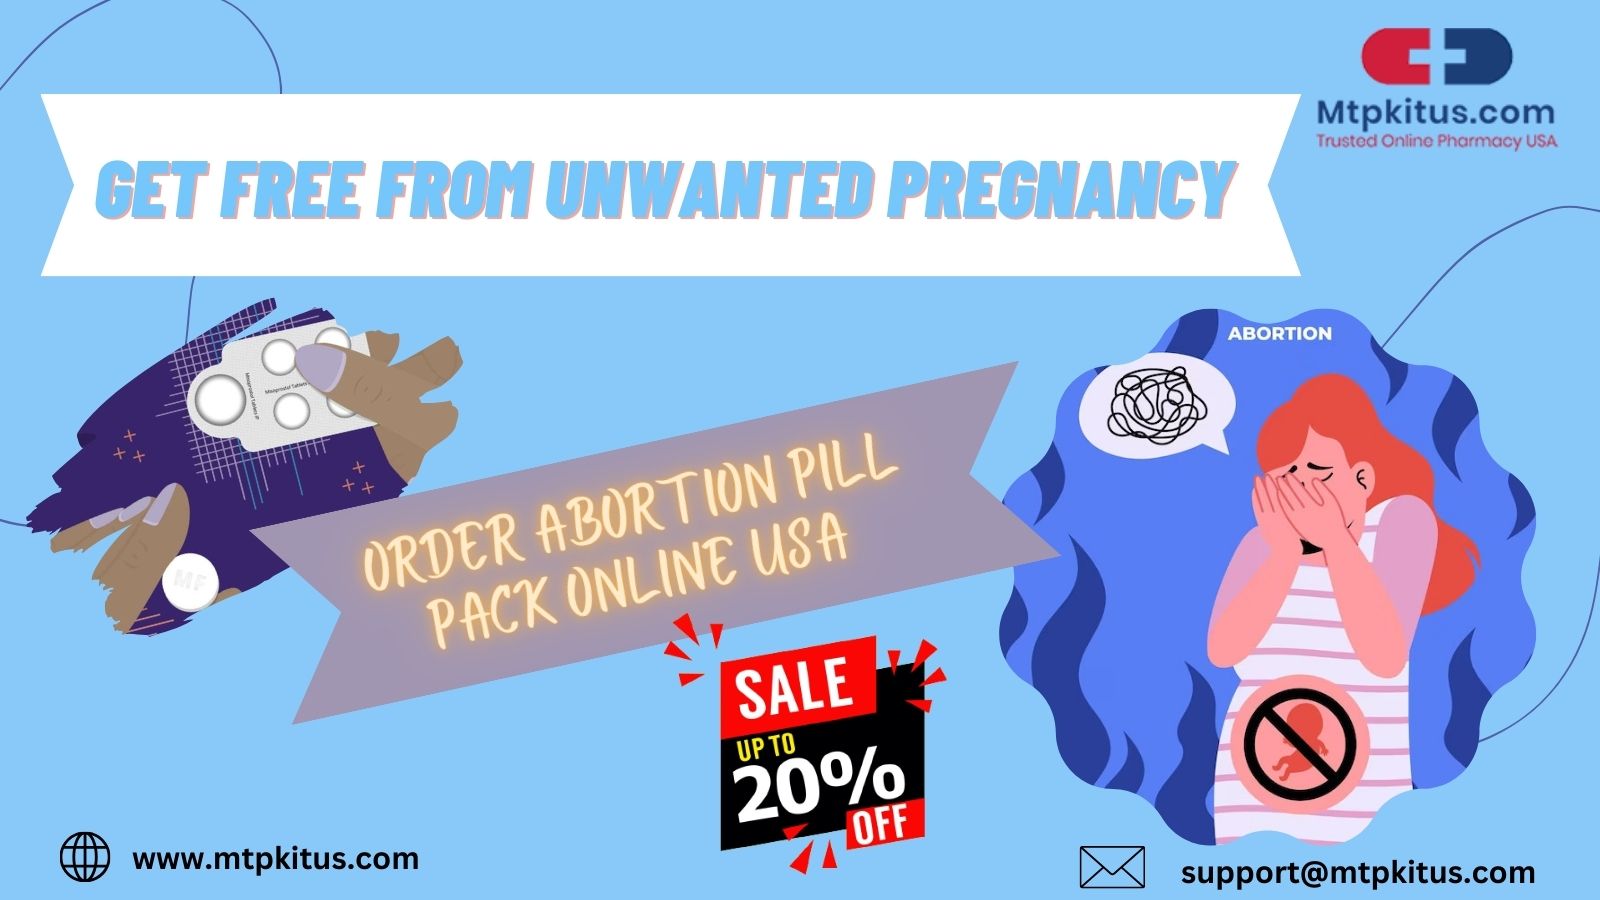 Order Abortion Pill Pack Online USA to get free from Unwanted Pregnancy